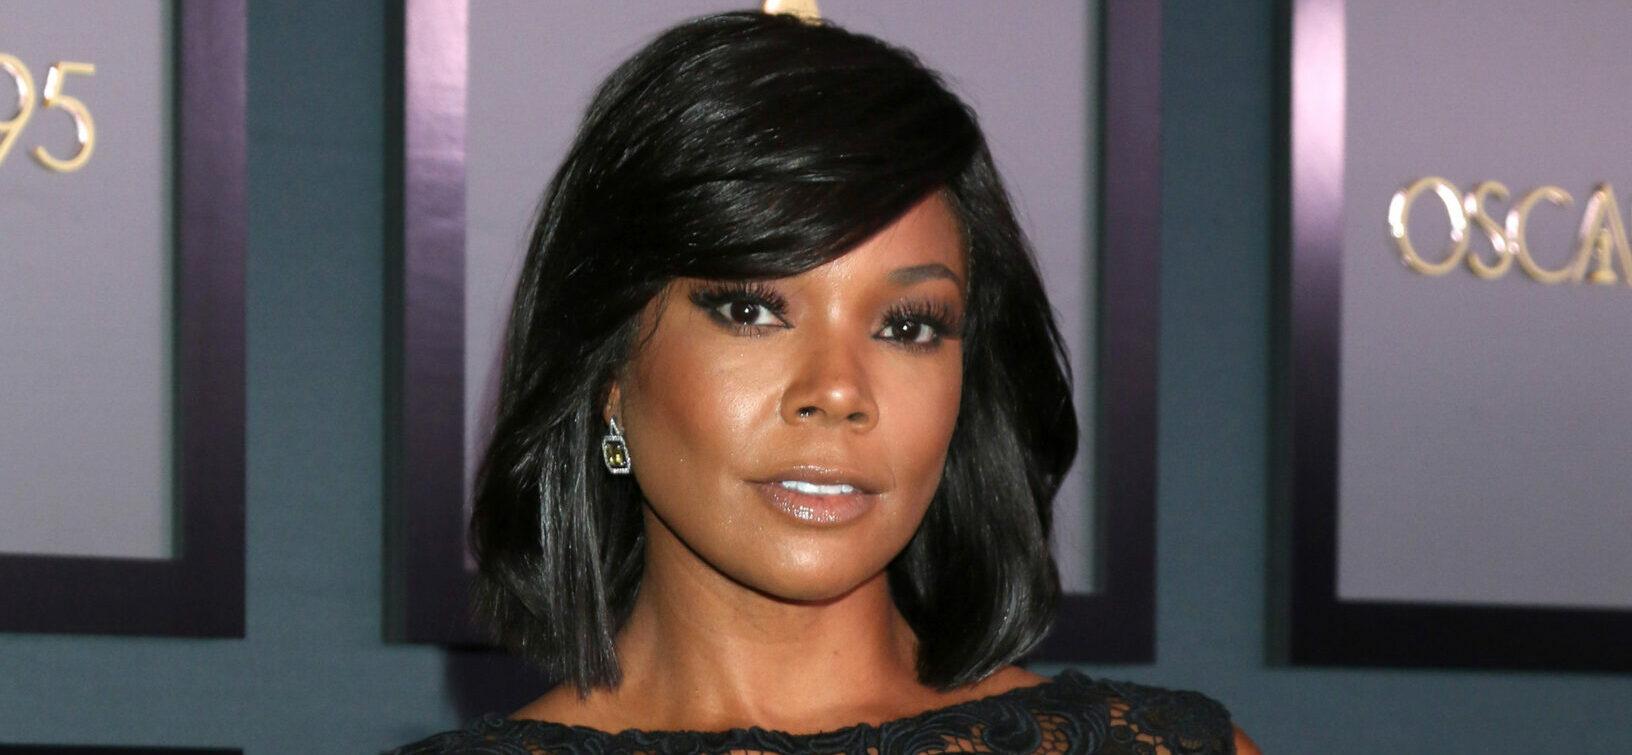 Gabrielle Union at the 13th Governors Awards - Century City